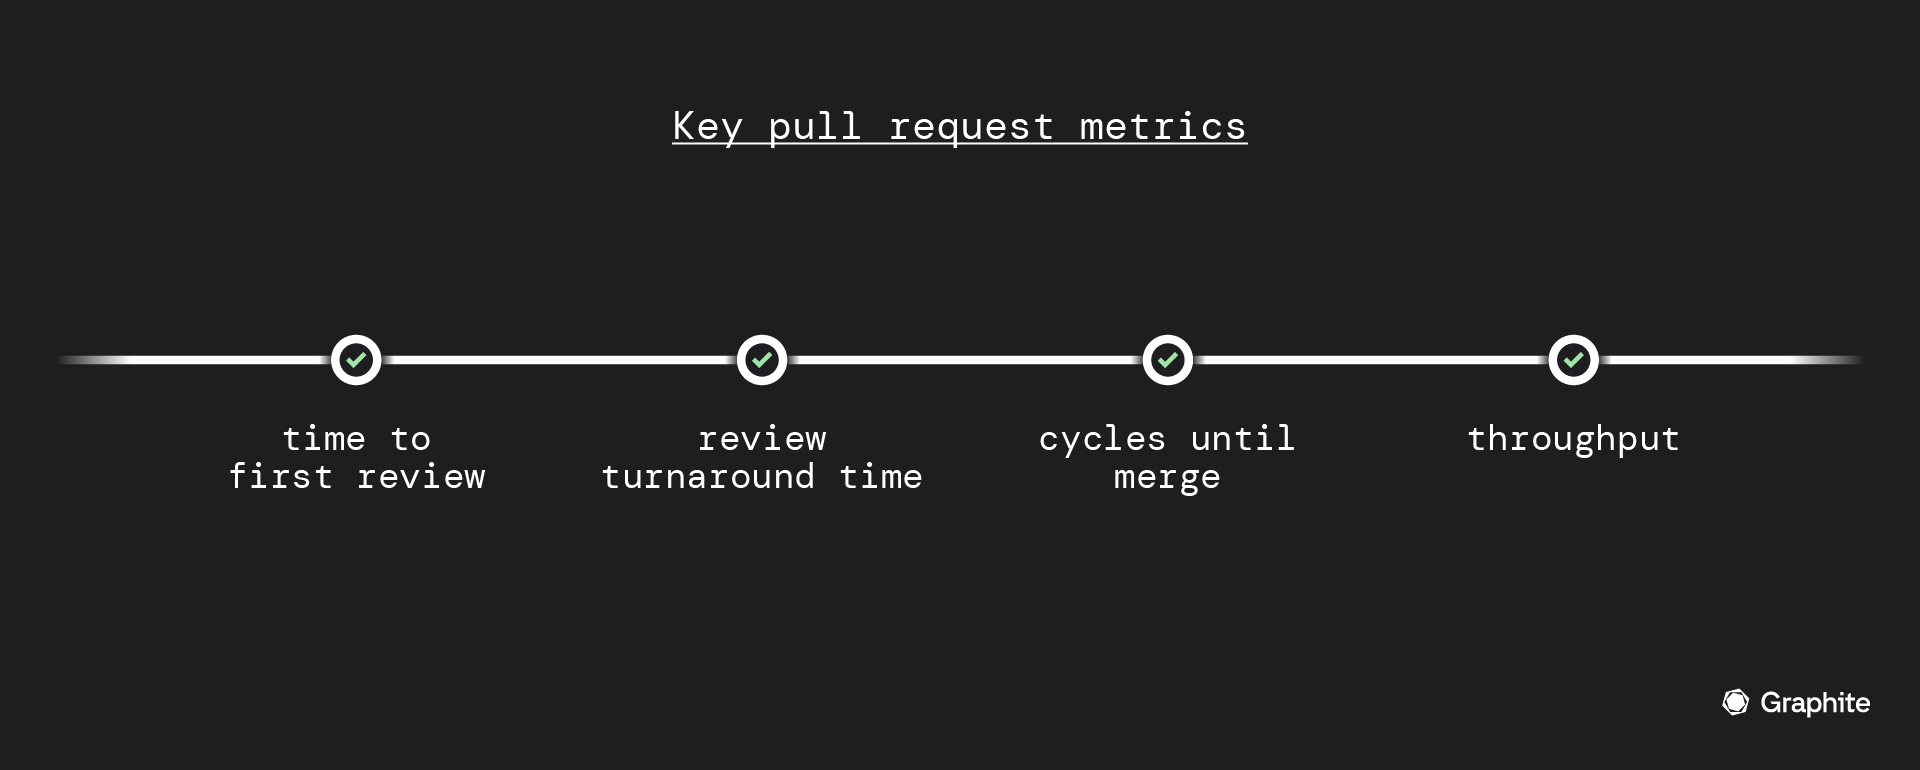 Key pull request metrics: time to first review; review turnaround time; cycles unti merge; throughput